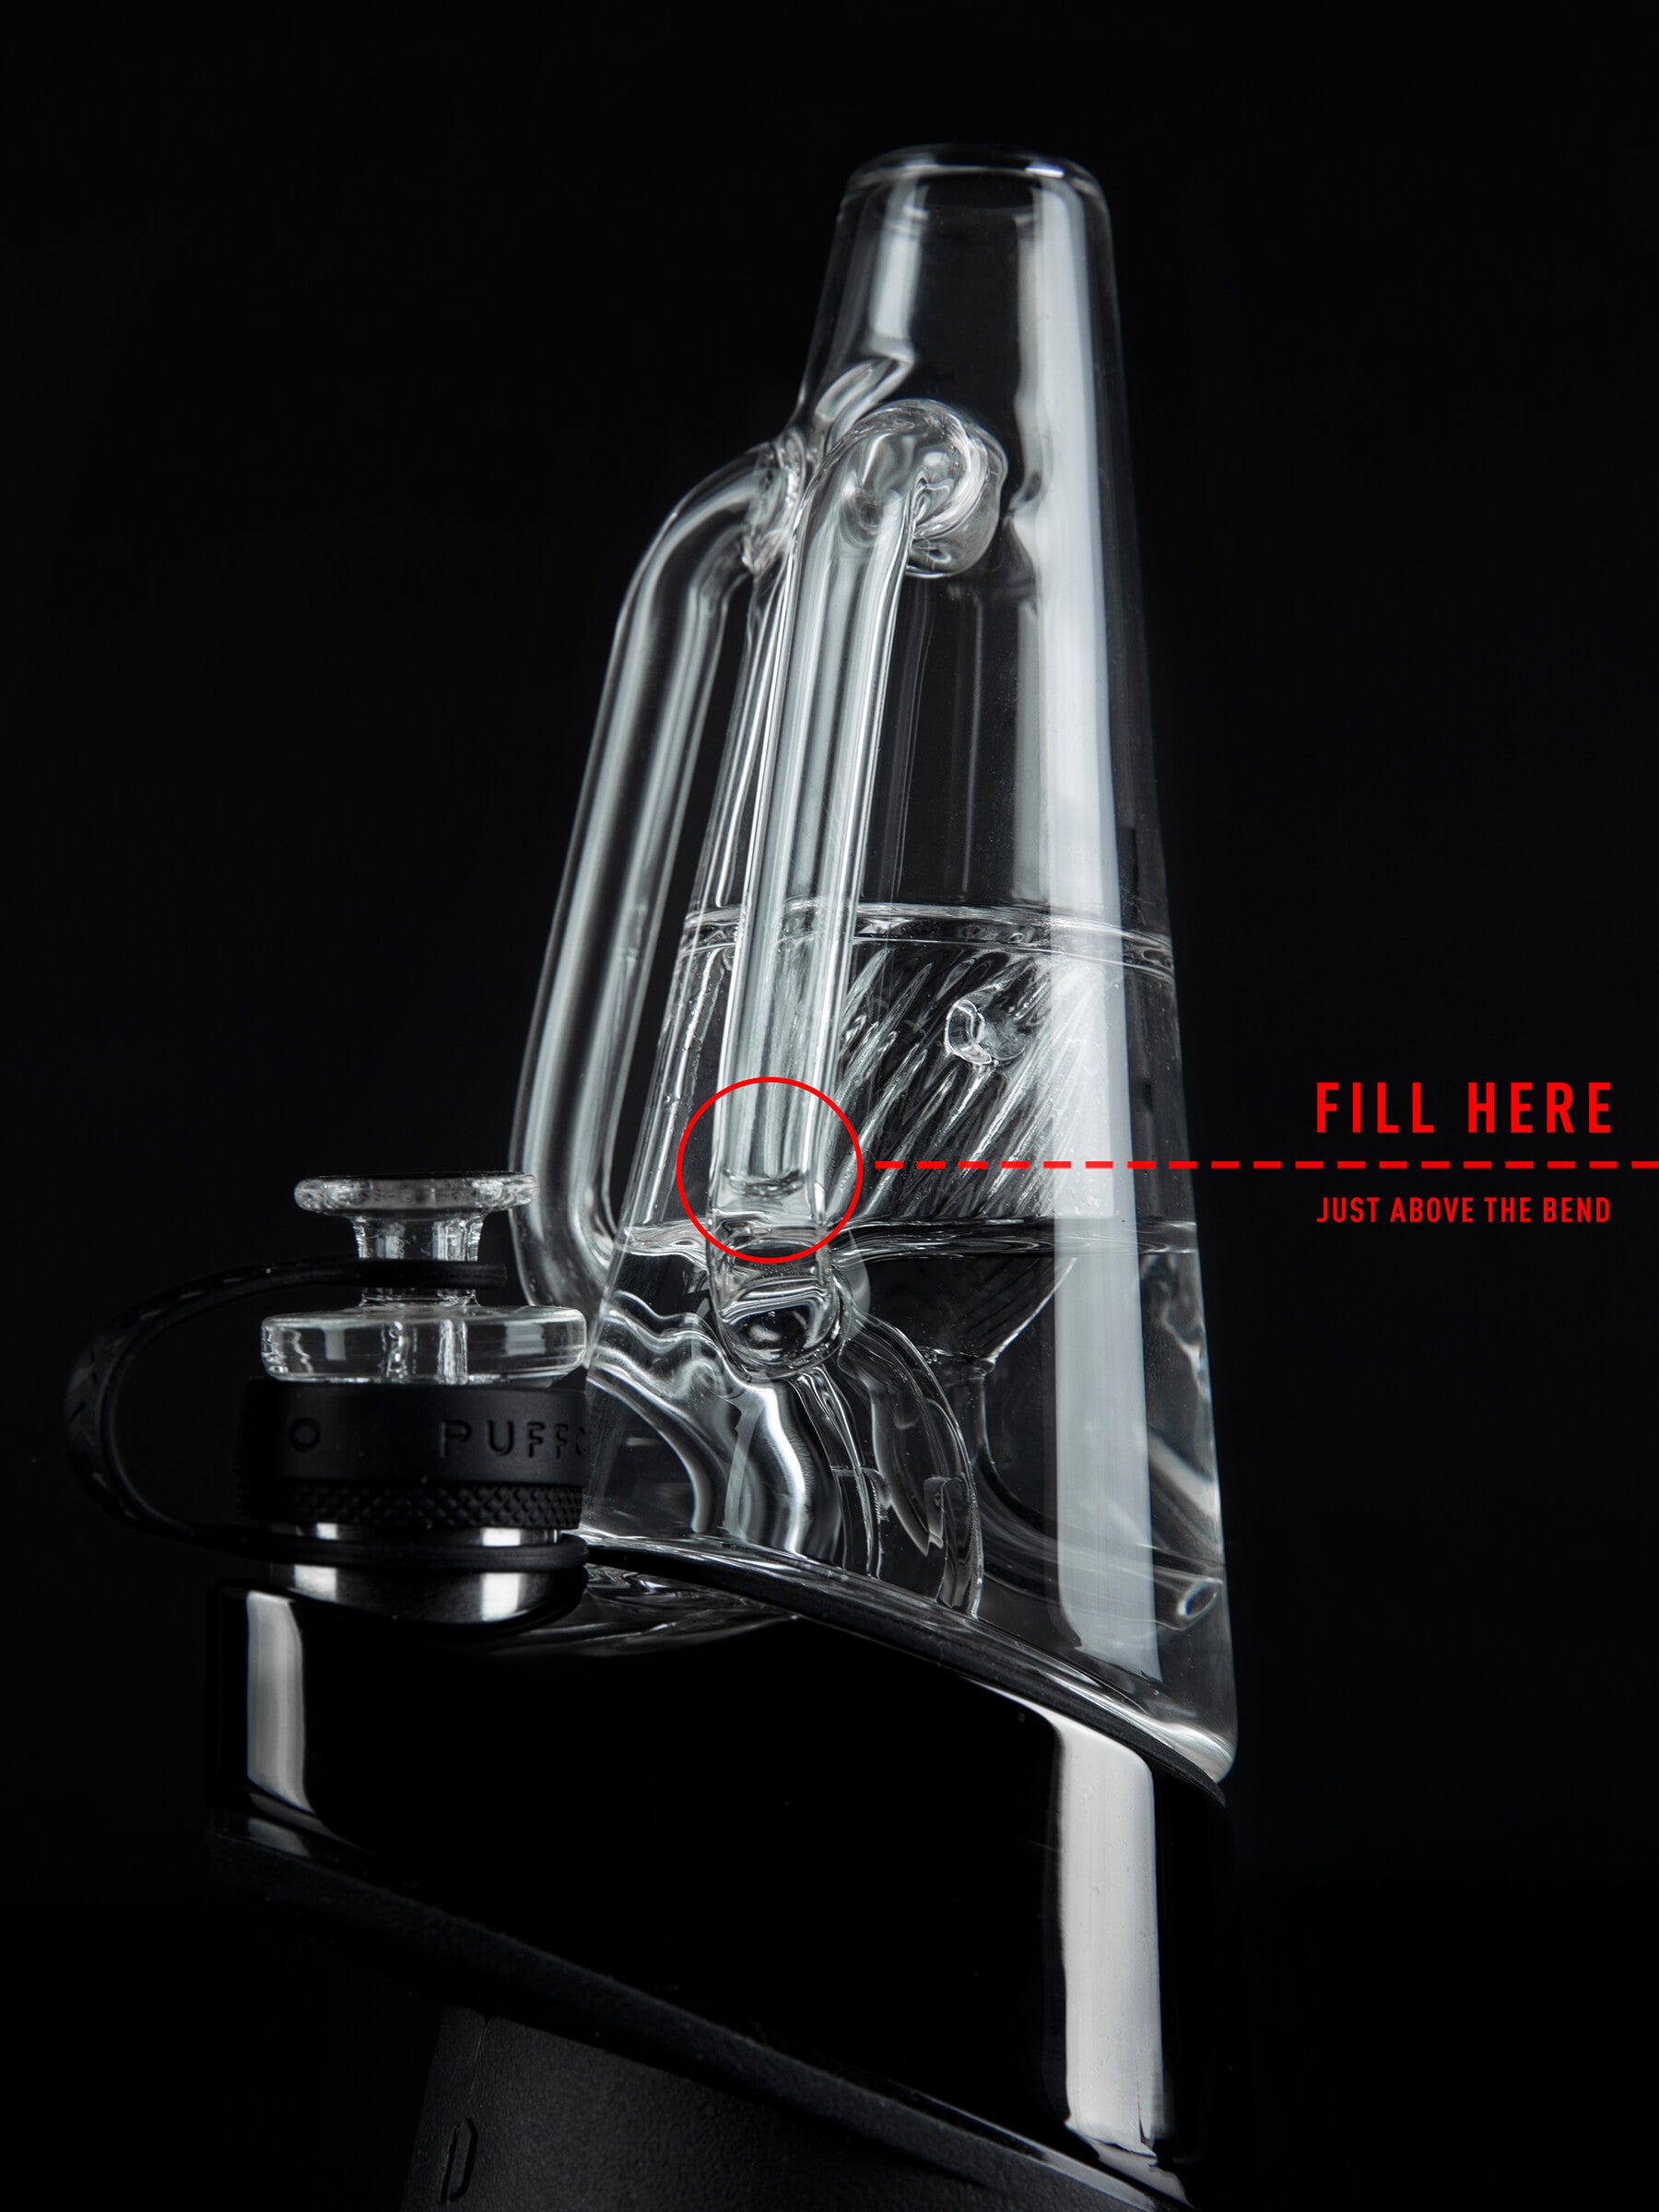 Angled front shot of Ryan Fitt glass with red text indicating "Fill Here" against black backdrop